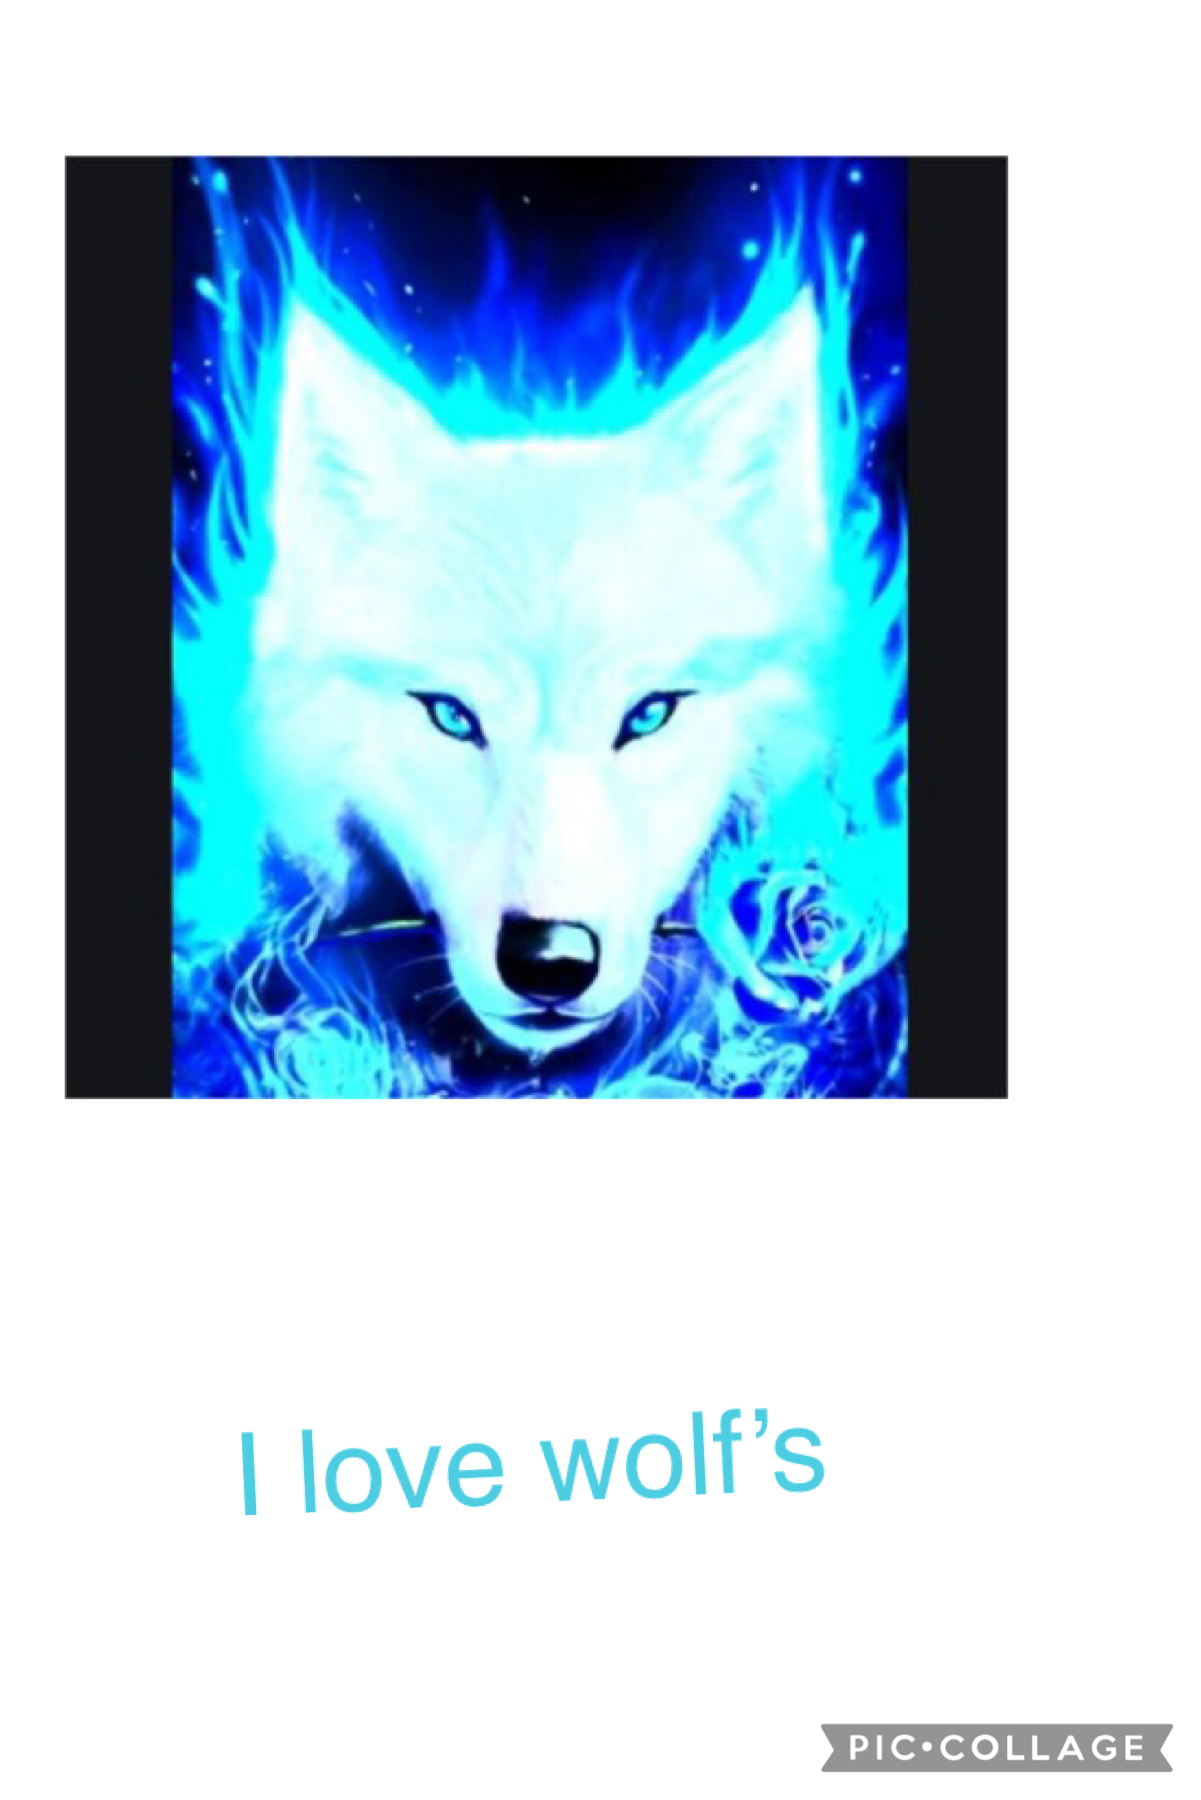 What’s your favorite animal? Tell me in the comments below please, my favorite animal is a wolf 